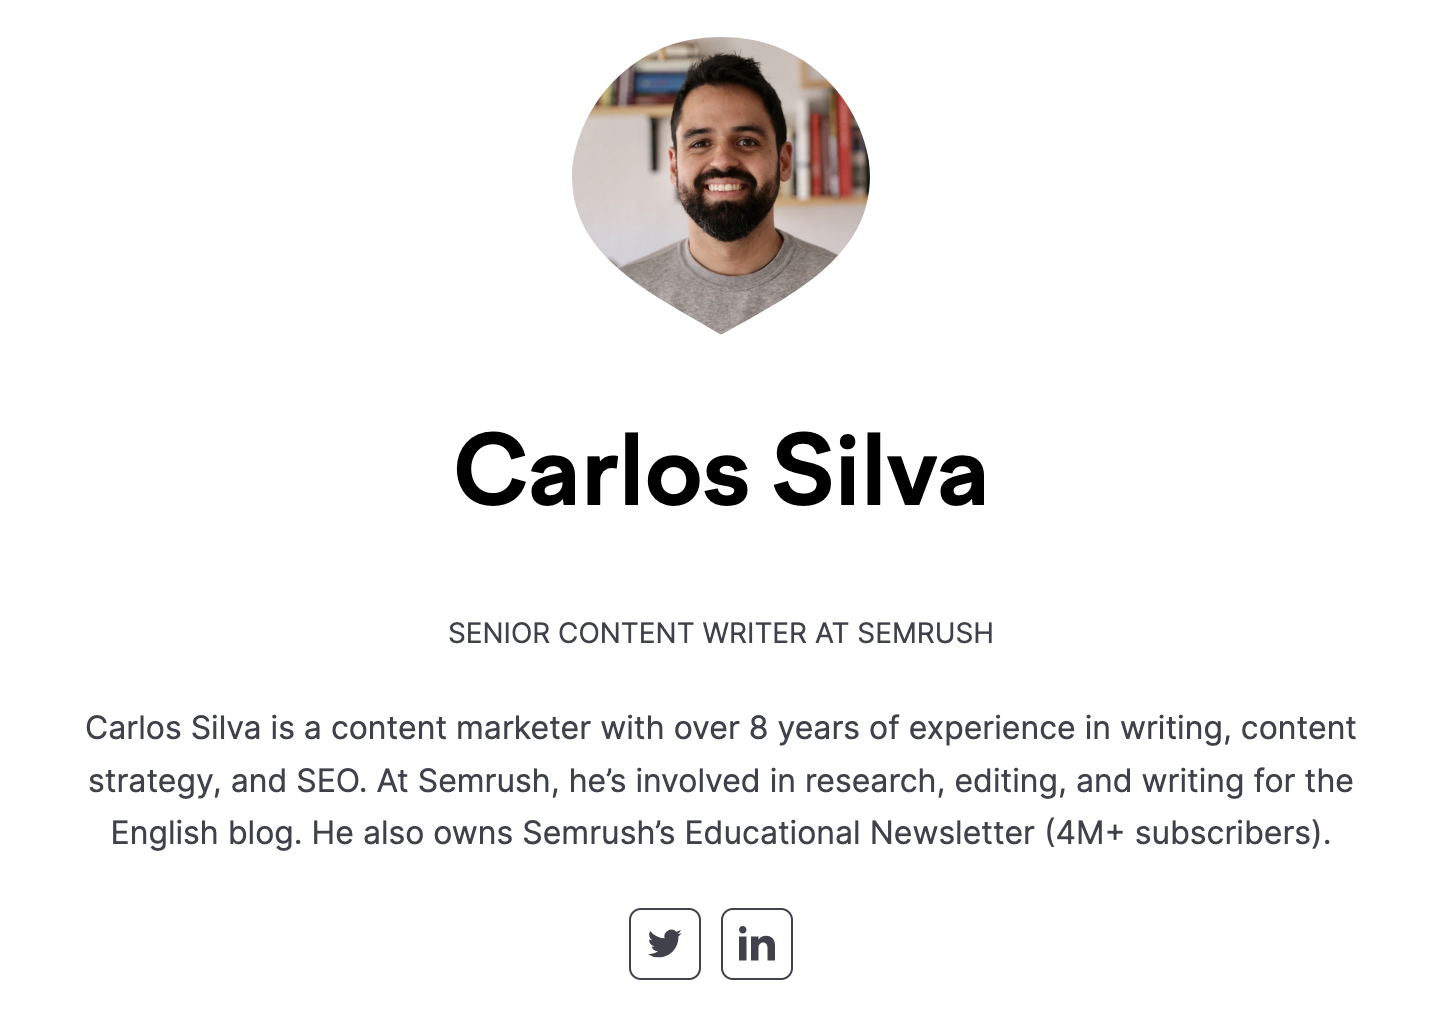 An author page for Carlos Silva, senior content writer at Semrush